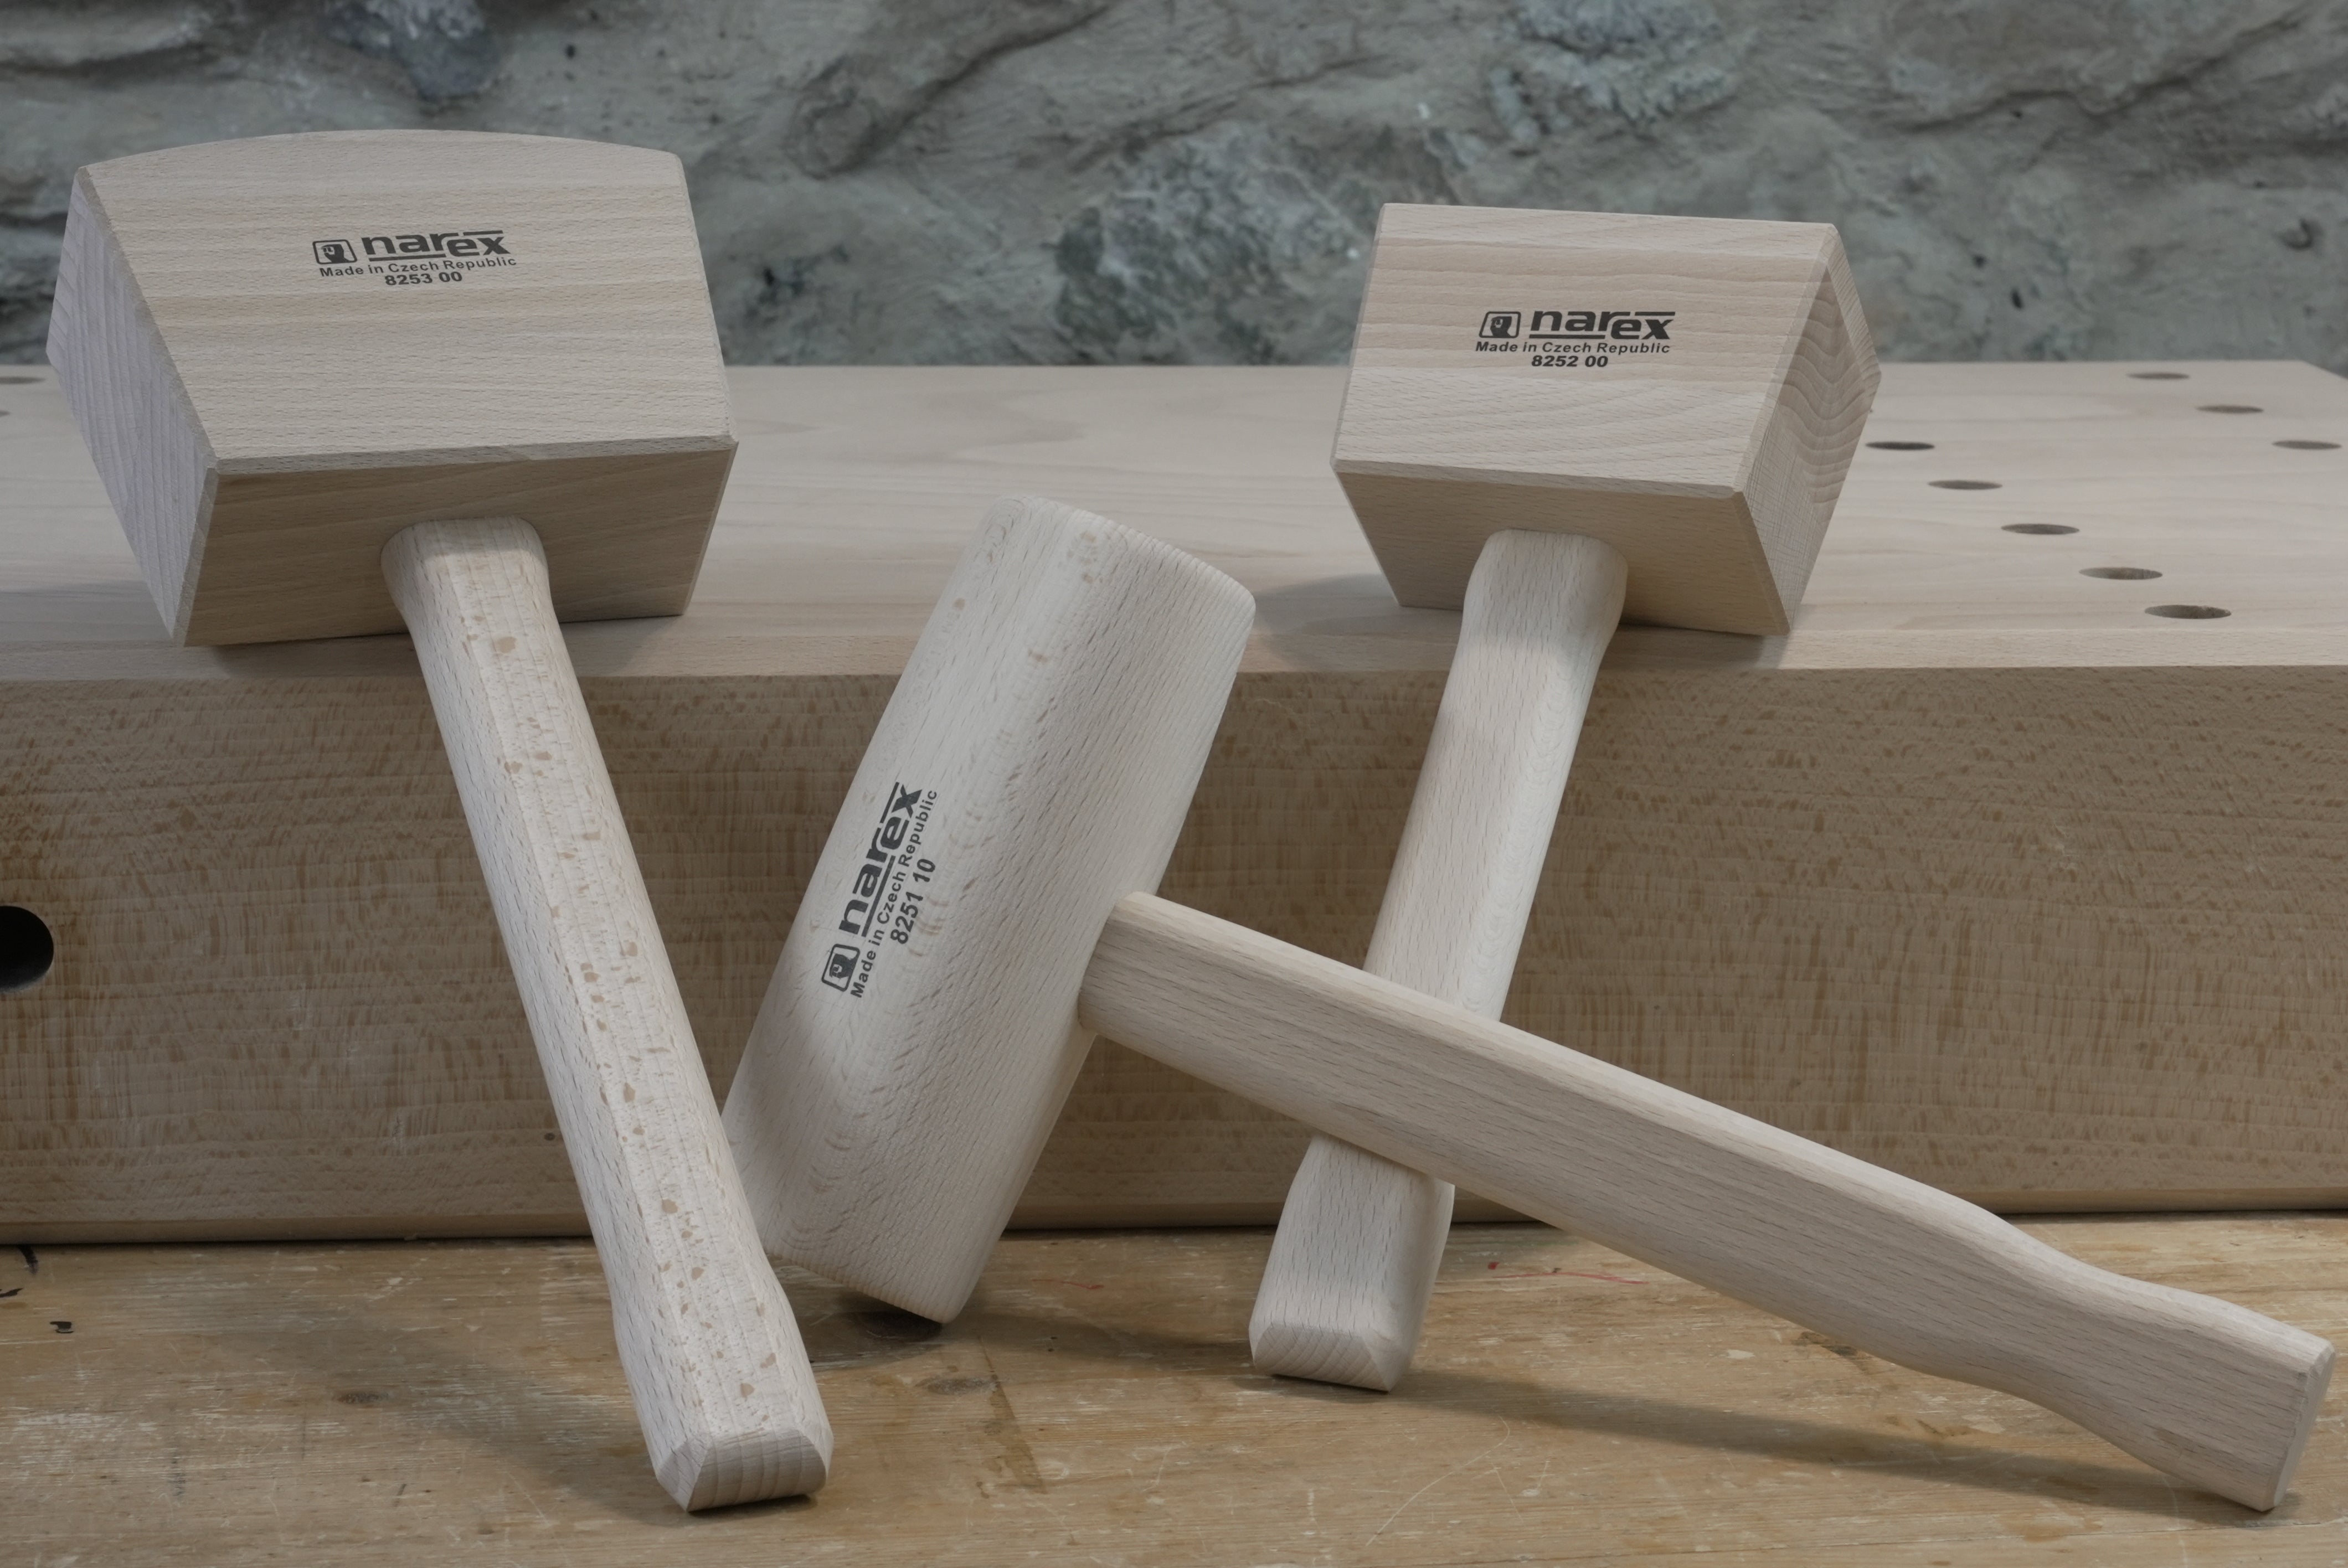 Joiner Mallet 60mm x 120mm 825100 by Narex